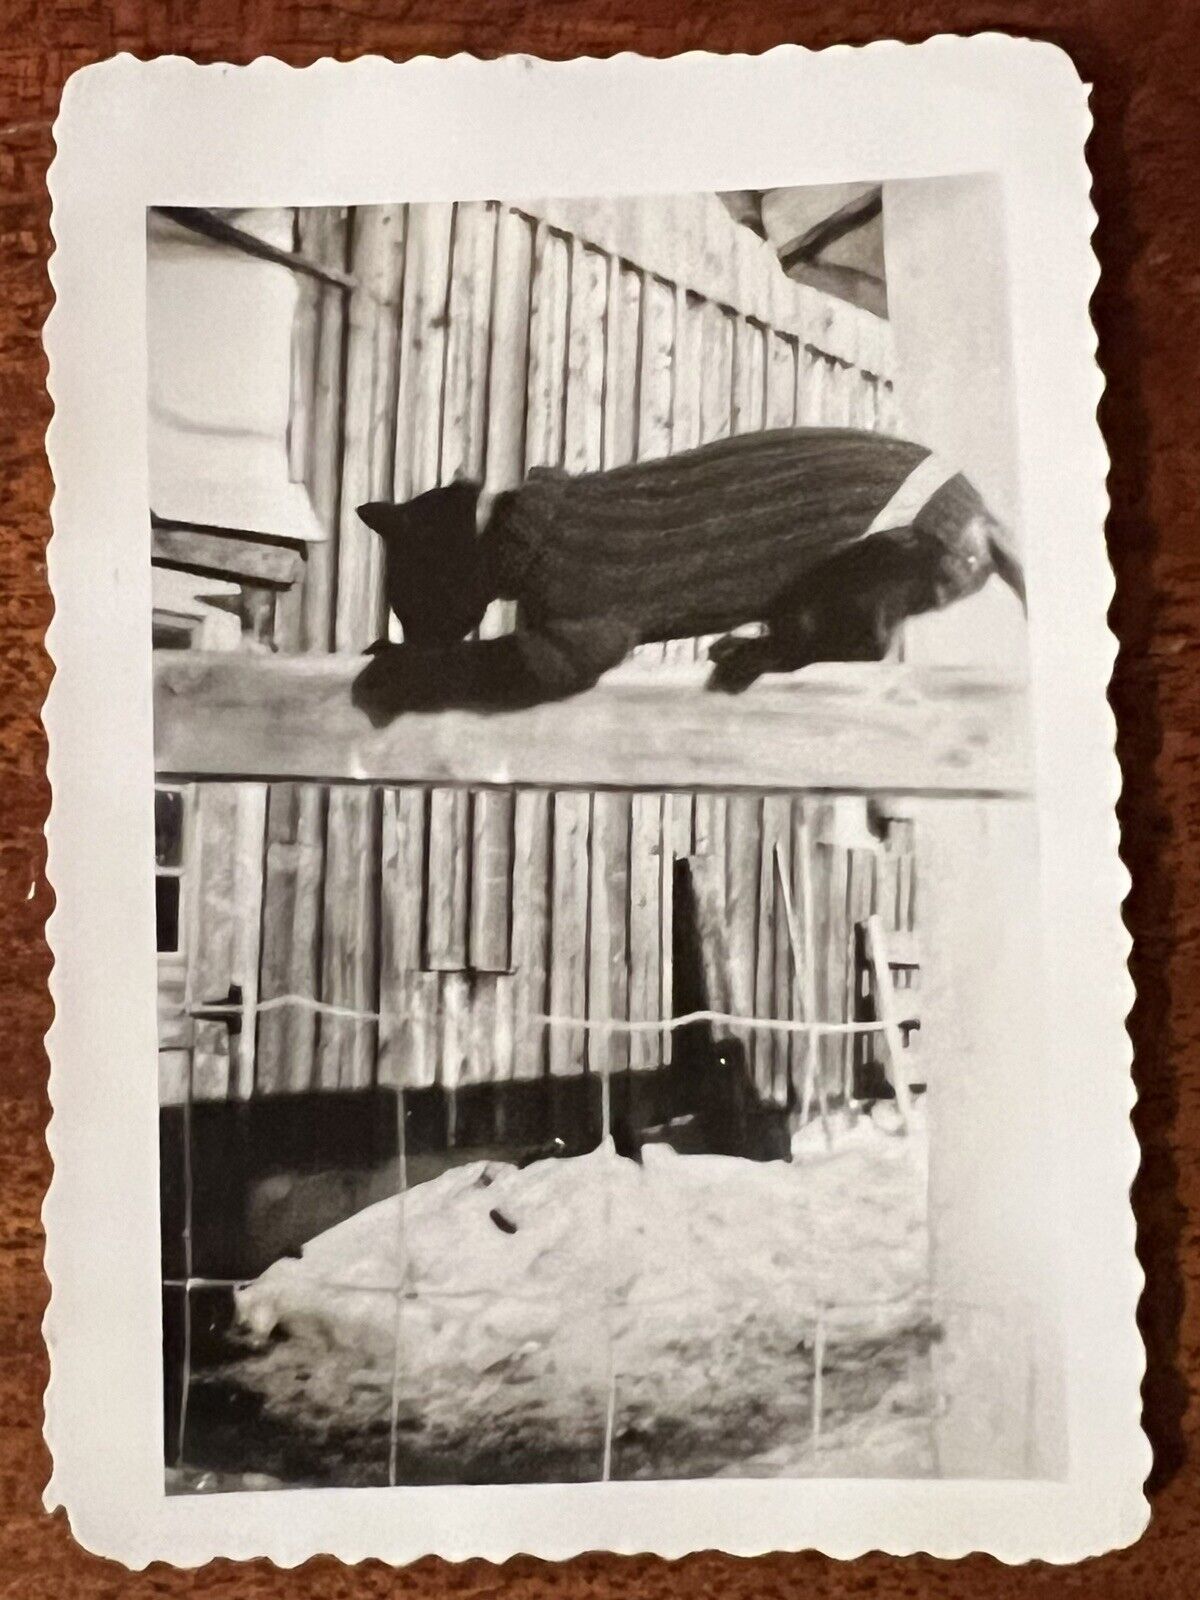 VTG c.1939 Photo Clever Black Cat in Knit Sweater Investigates Farm Weird Humor